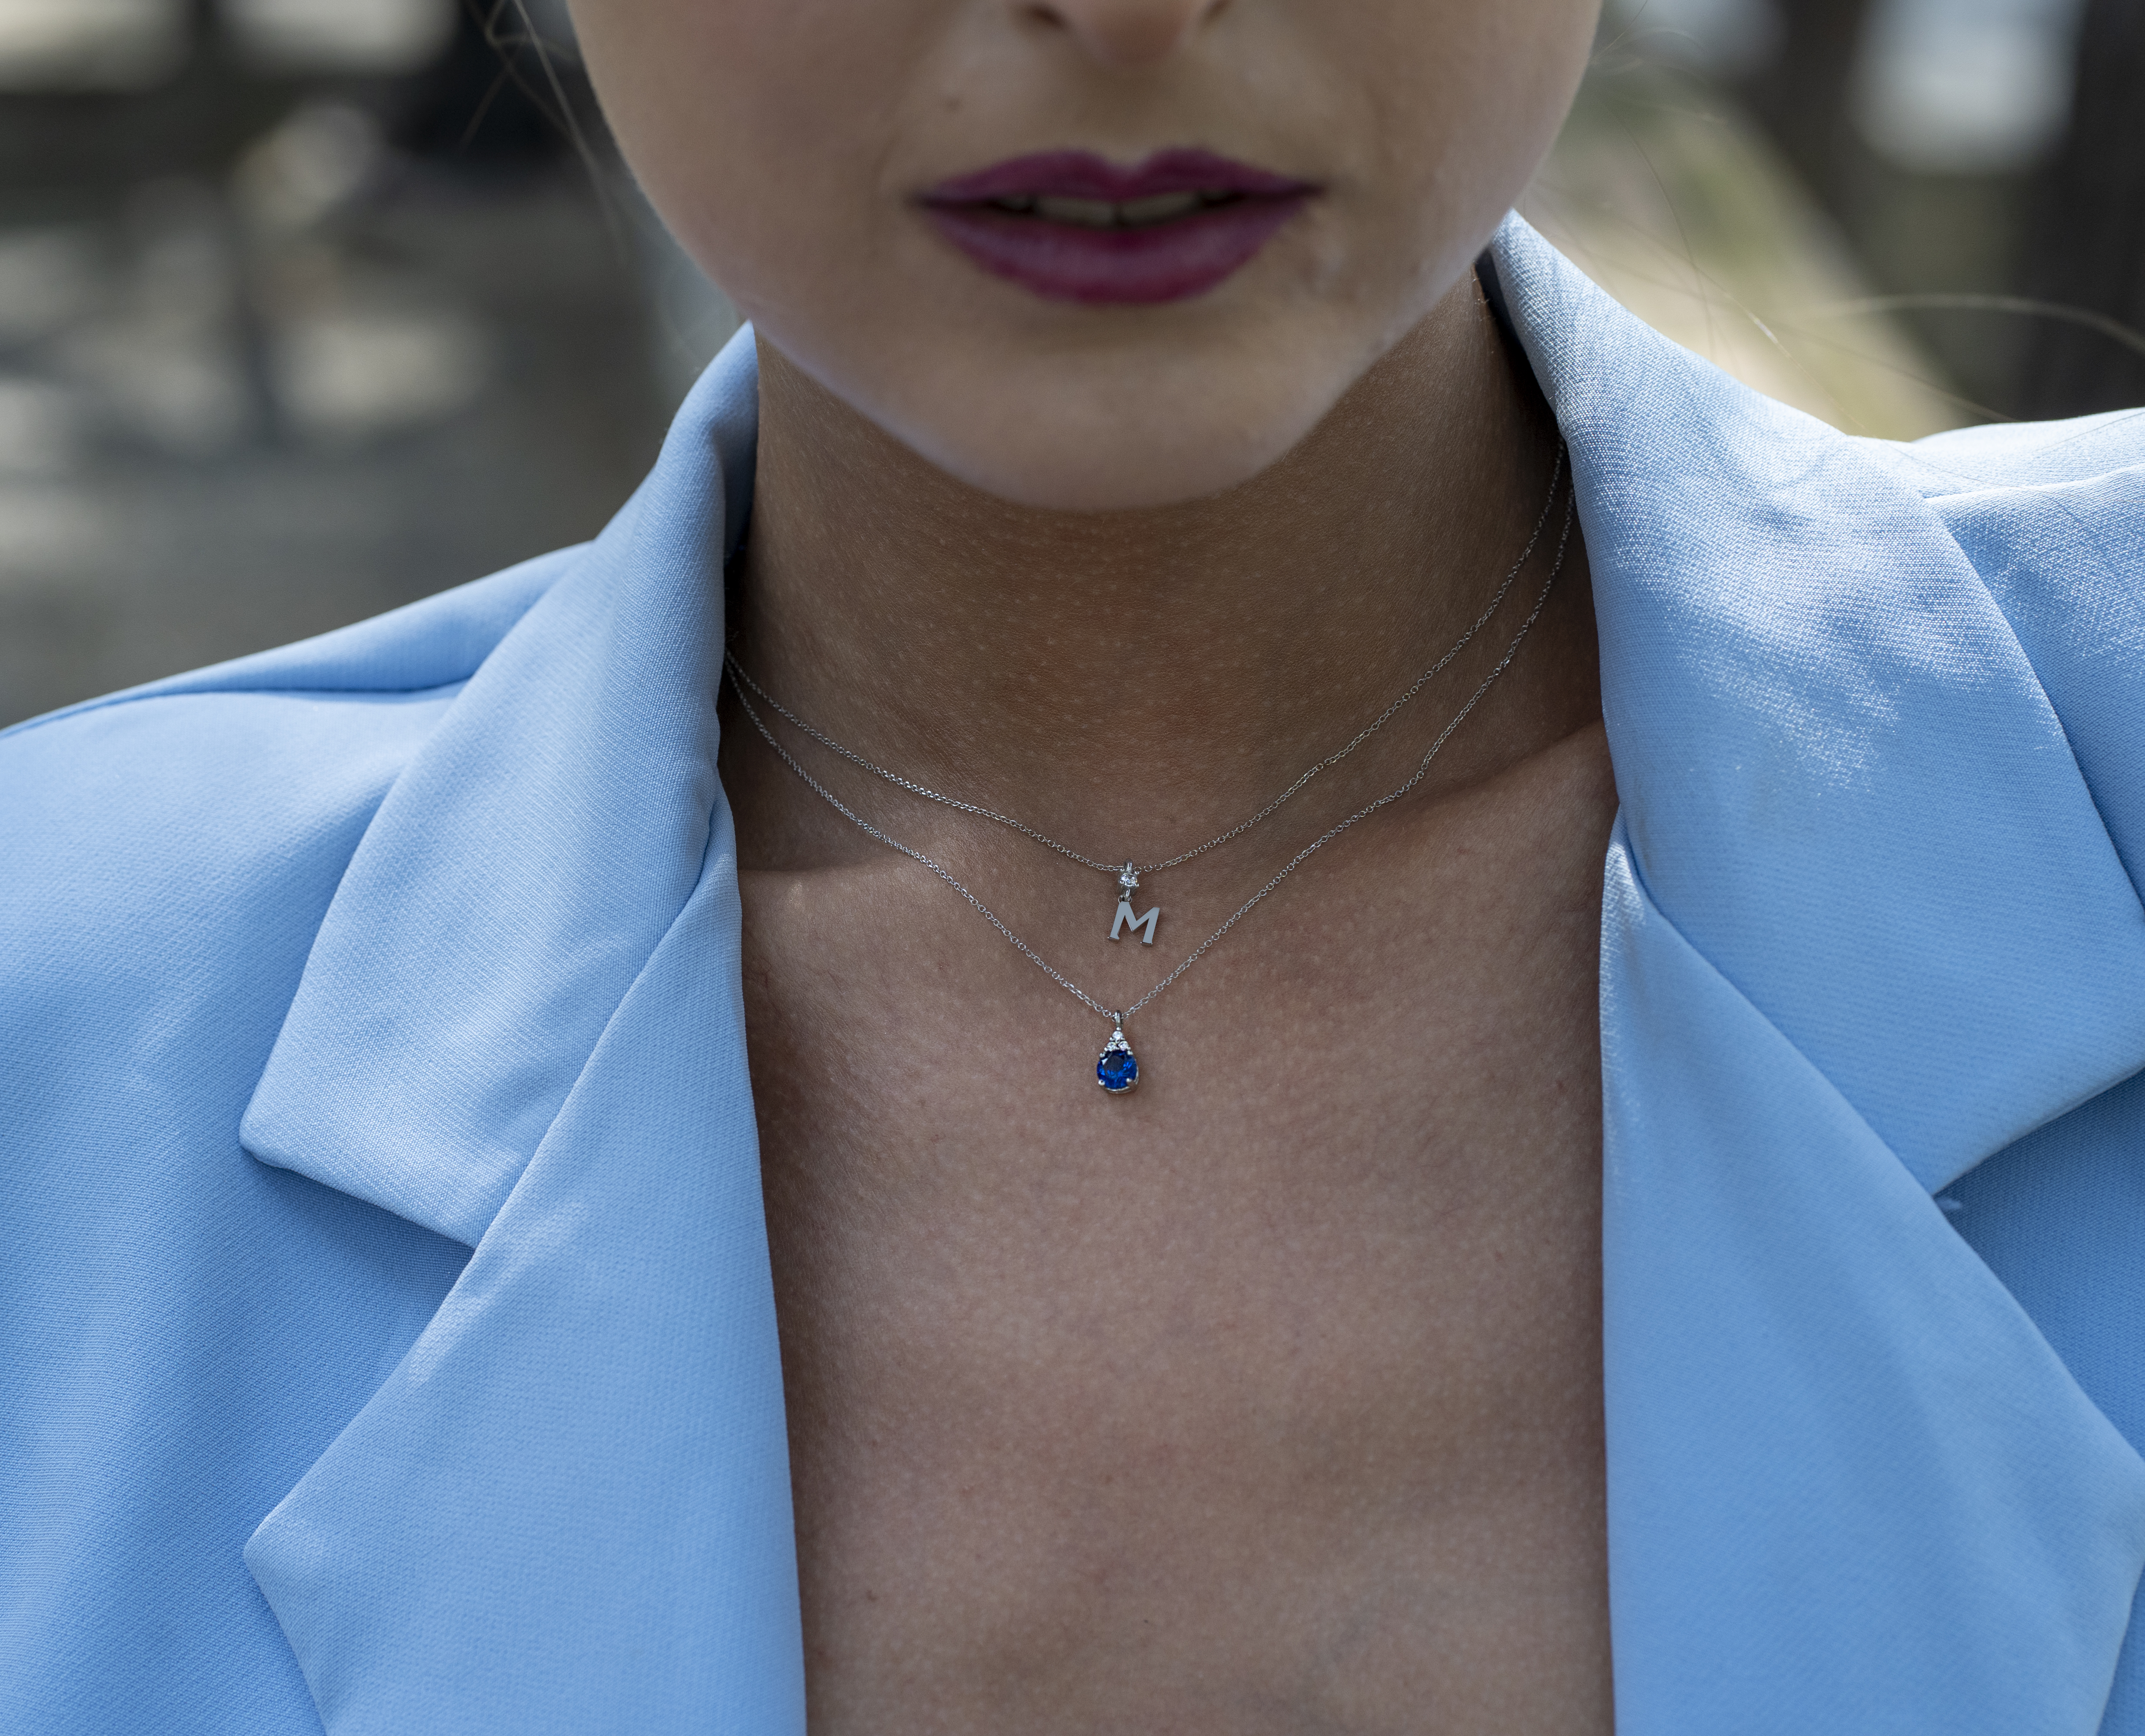 K9 white gold necklace with a teardrop-shaped pendant adorned with a round blue stone.